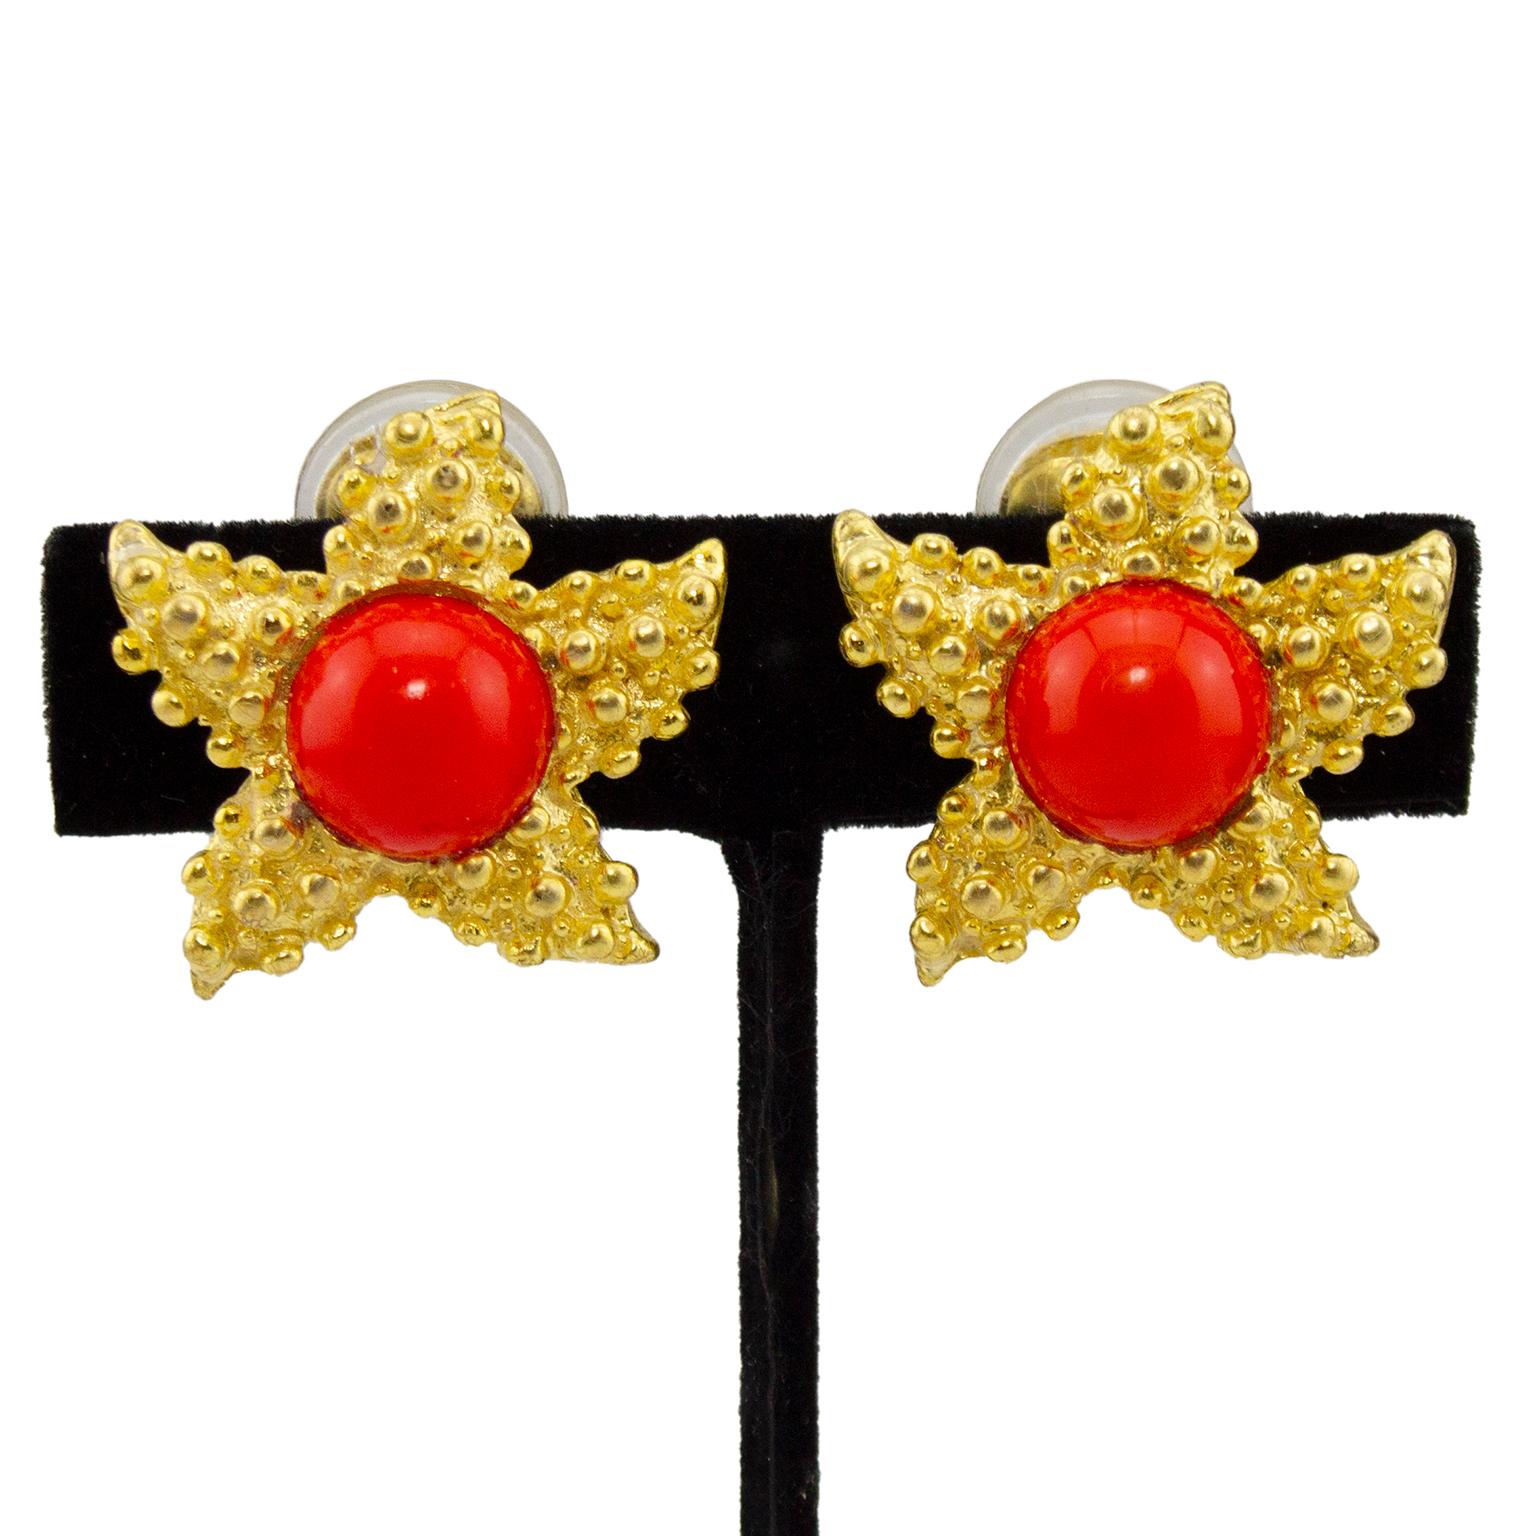 Beautiful Kenneth Jay Lane earrings from the 1990s. Gold tone textured starfish with faux coral cabochons centres. Clip ons with plastic backings for comfort on ears. ©KJL marking on backs. Perfect for summer evenings or tropical holidays! Excellent